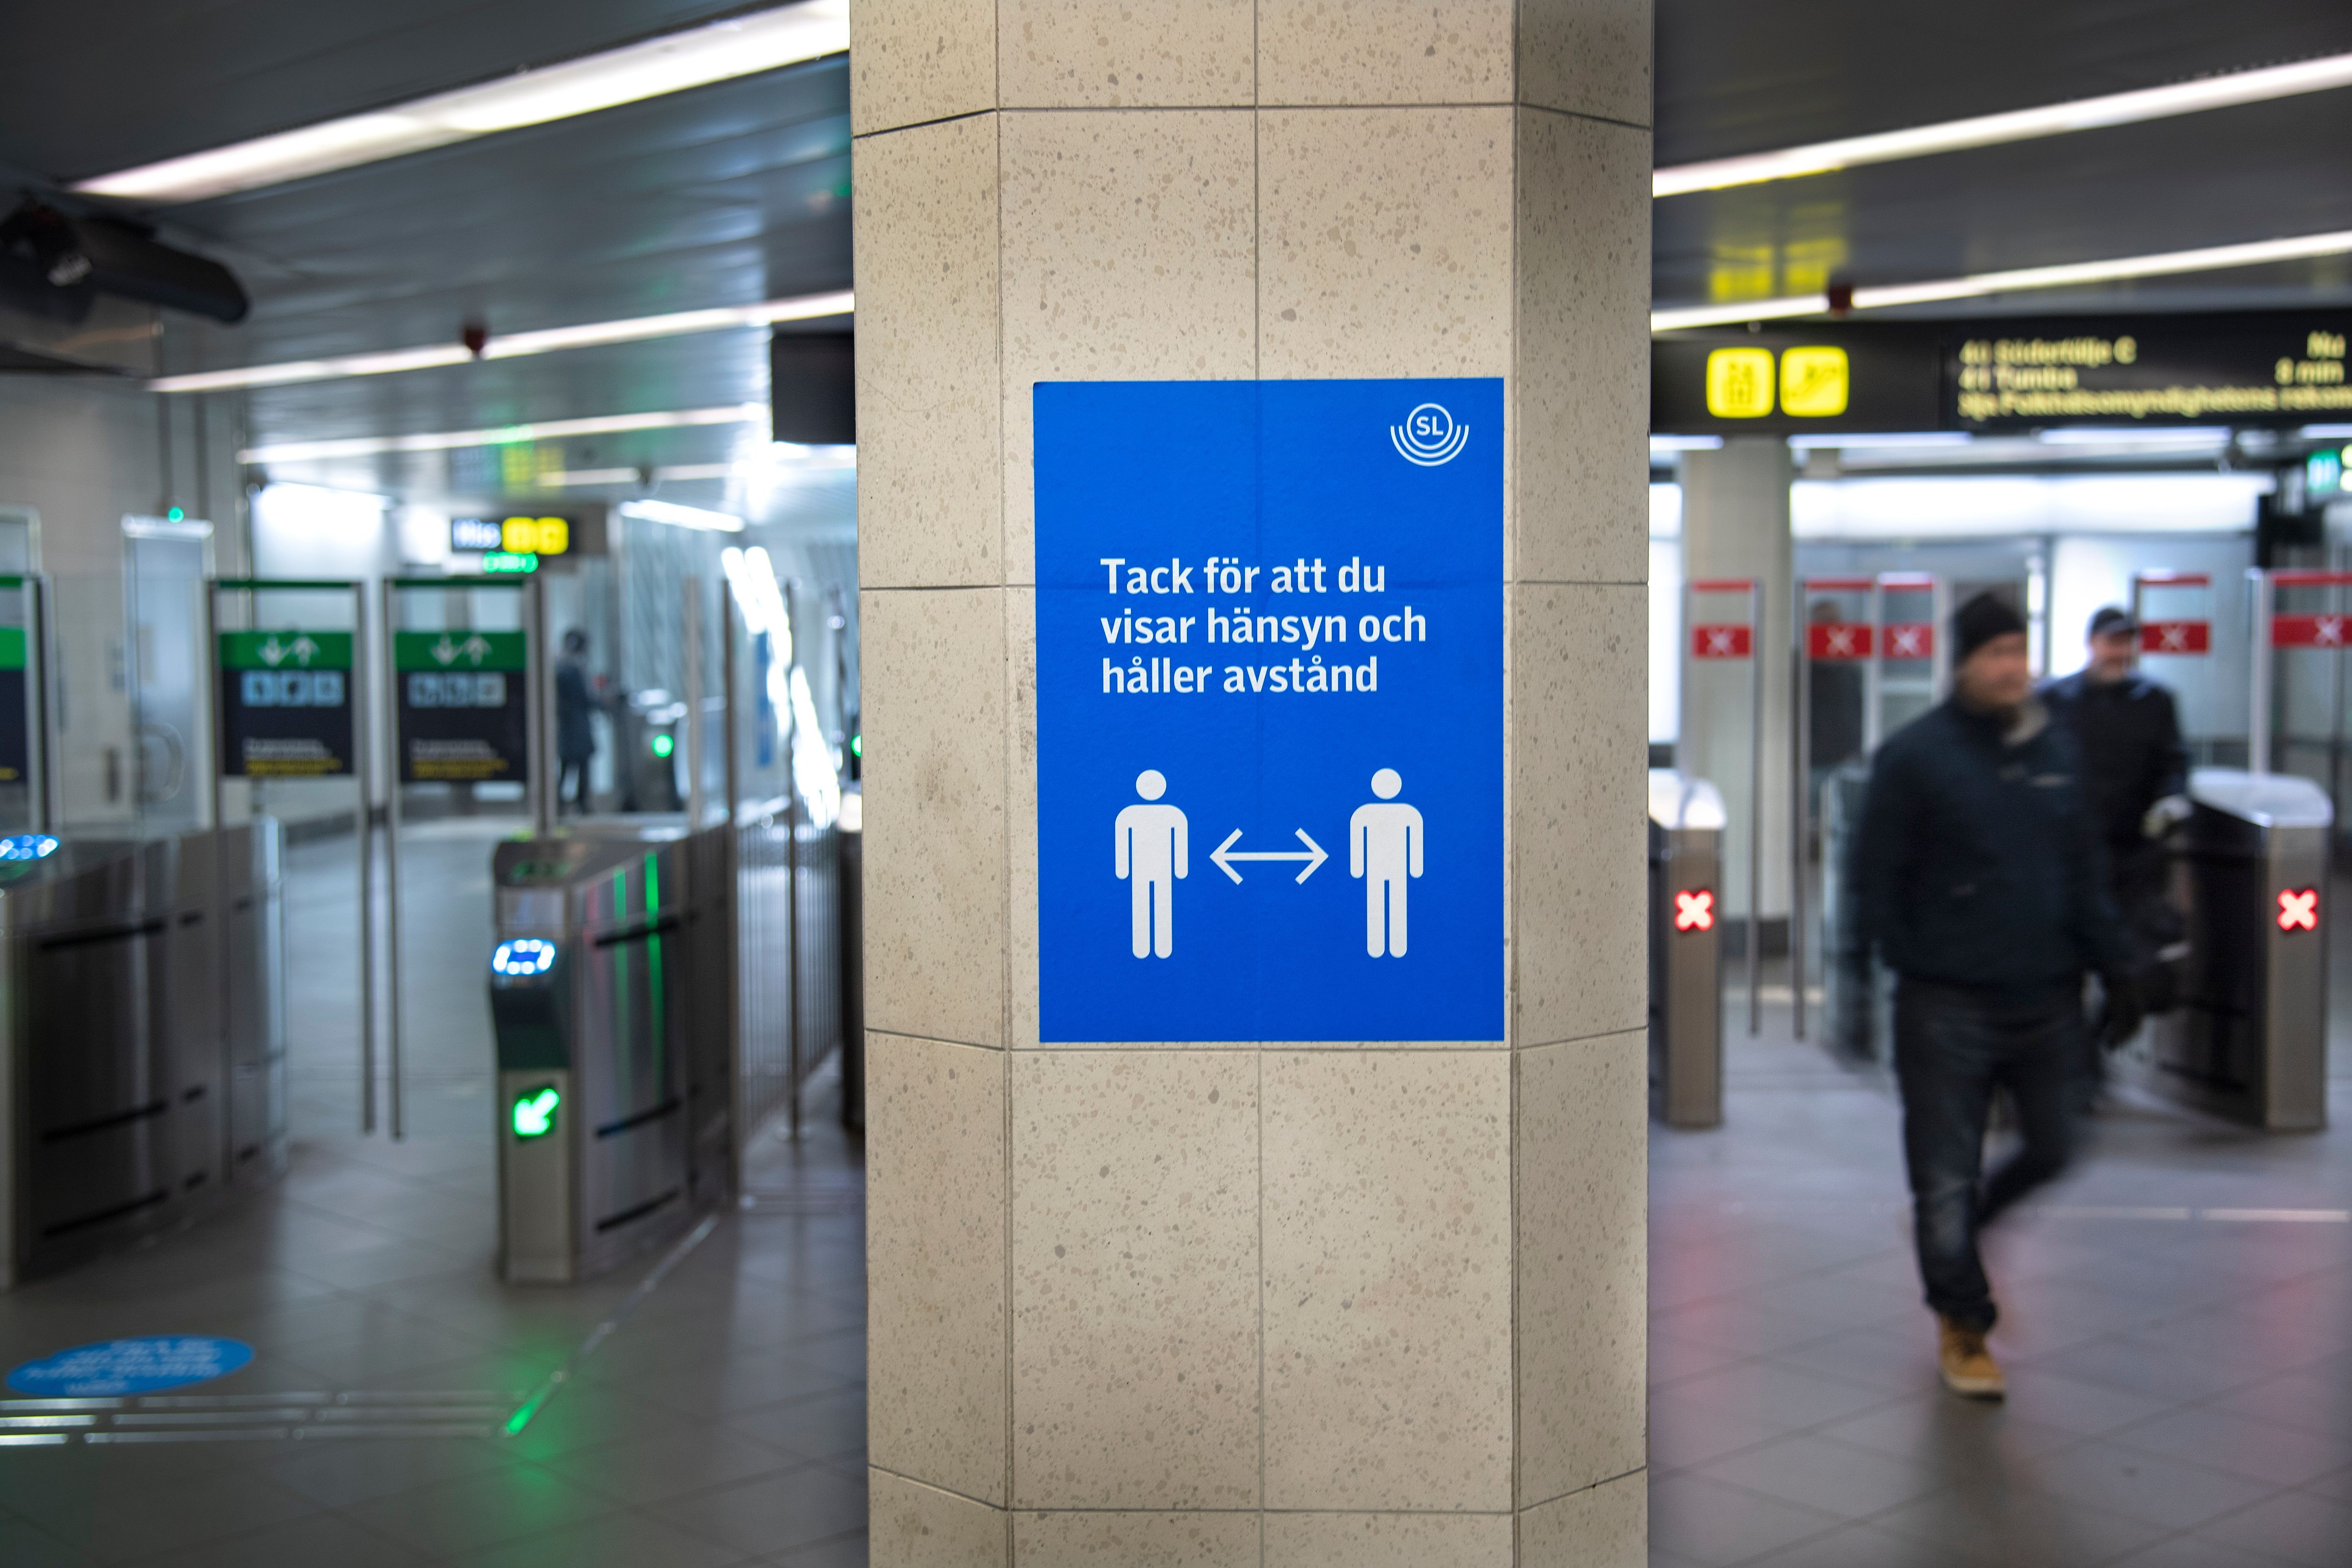 Travelers are seen on November 4, 2020 at a station of the public transport in Stockholm, where people are requested to maintain social distancing